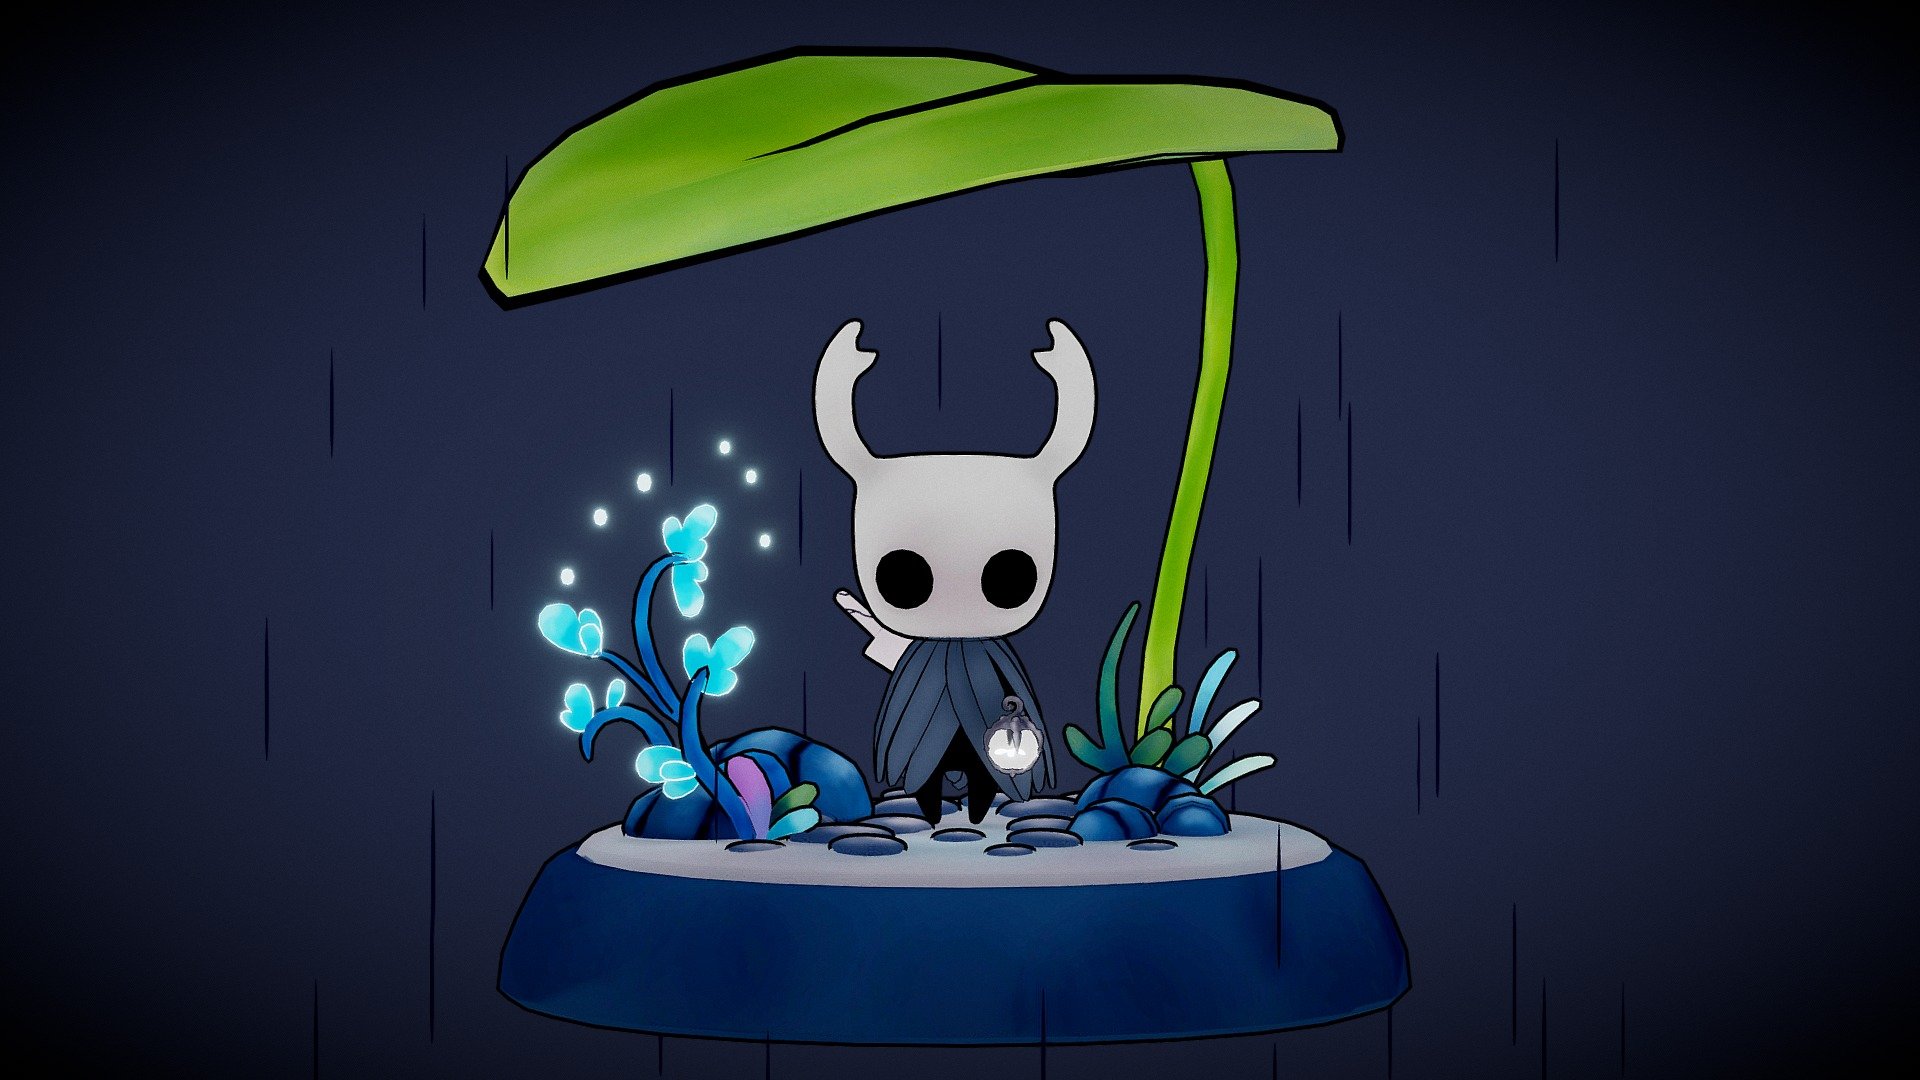 3D model of the Knight - little ghost from game Hollow Knight made in Blender 2.8. The model has a rig and Idle animation. Textures are handpainted and the model is cellshaded 3d model